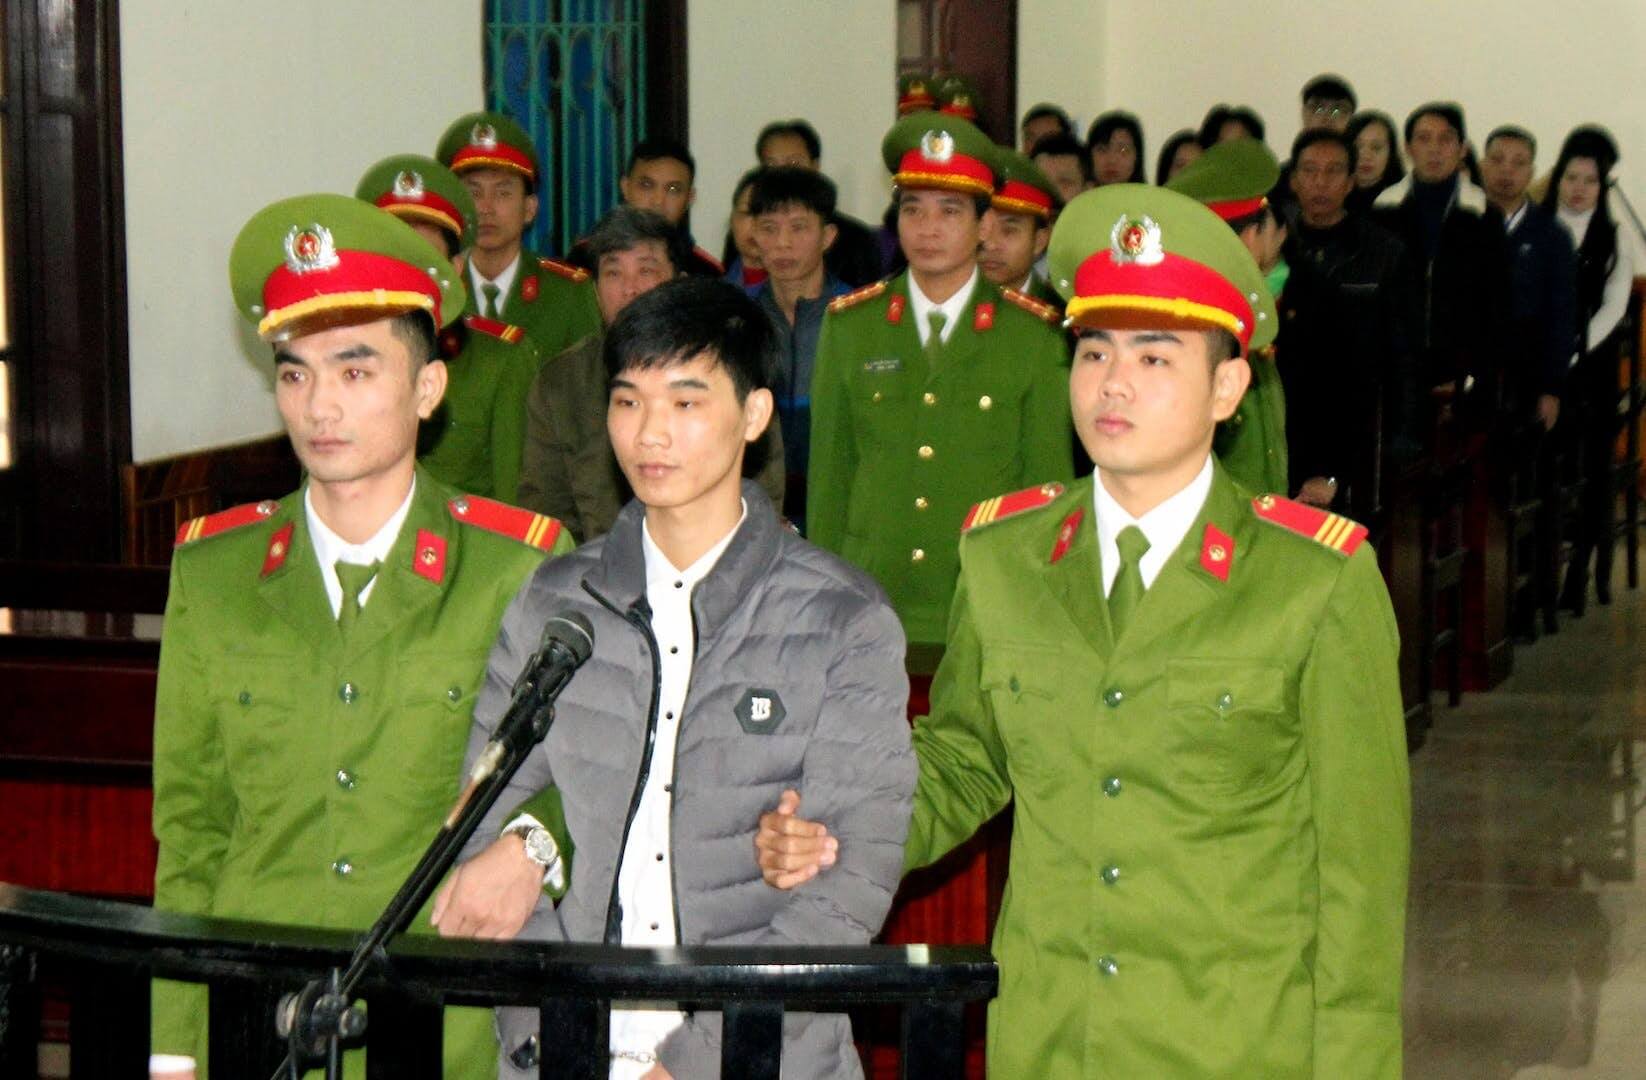 Press Release — Vietnam: HRF Condemns Jailing of 22-Year-Old Blogger